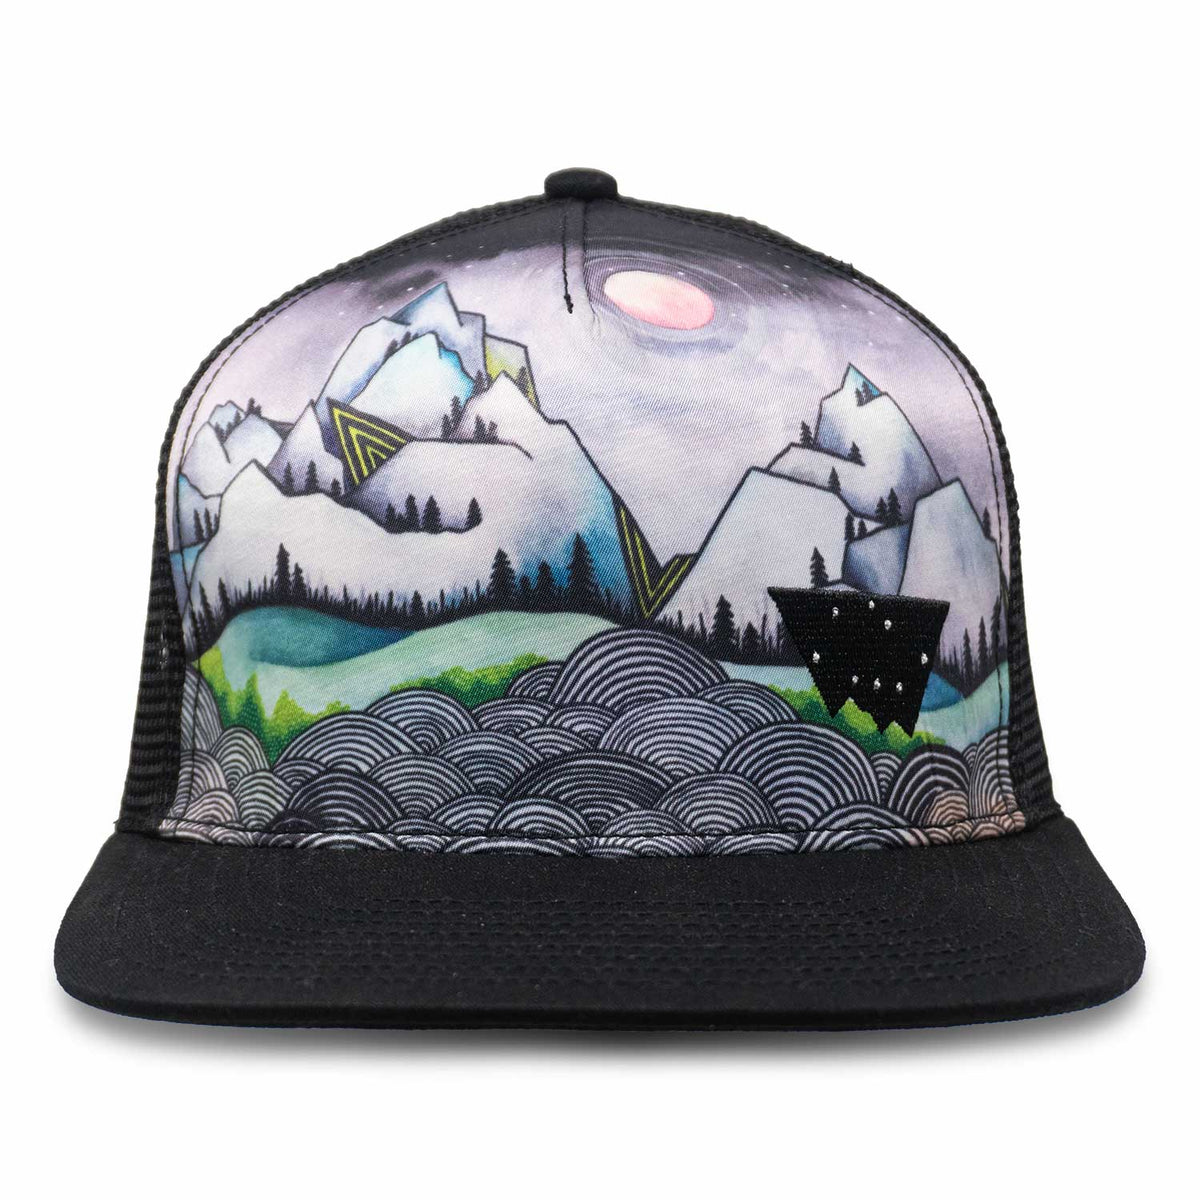 Flat Bill Trucker Snap Back Hat with Black Mesh and Bill featuring Elise Holme's Watercolor Painting of the Minaret Mountain Range